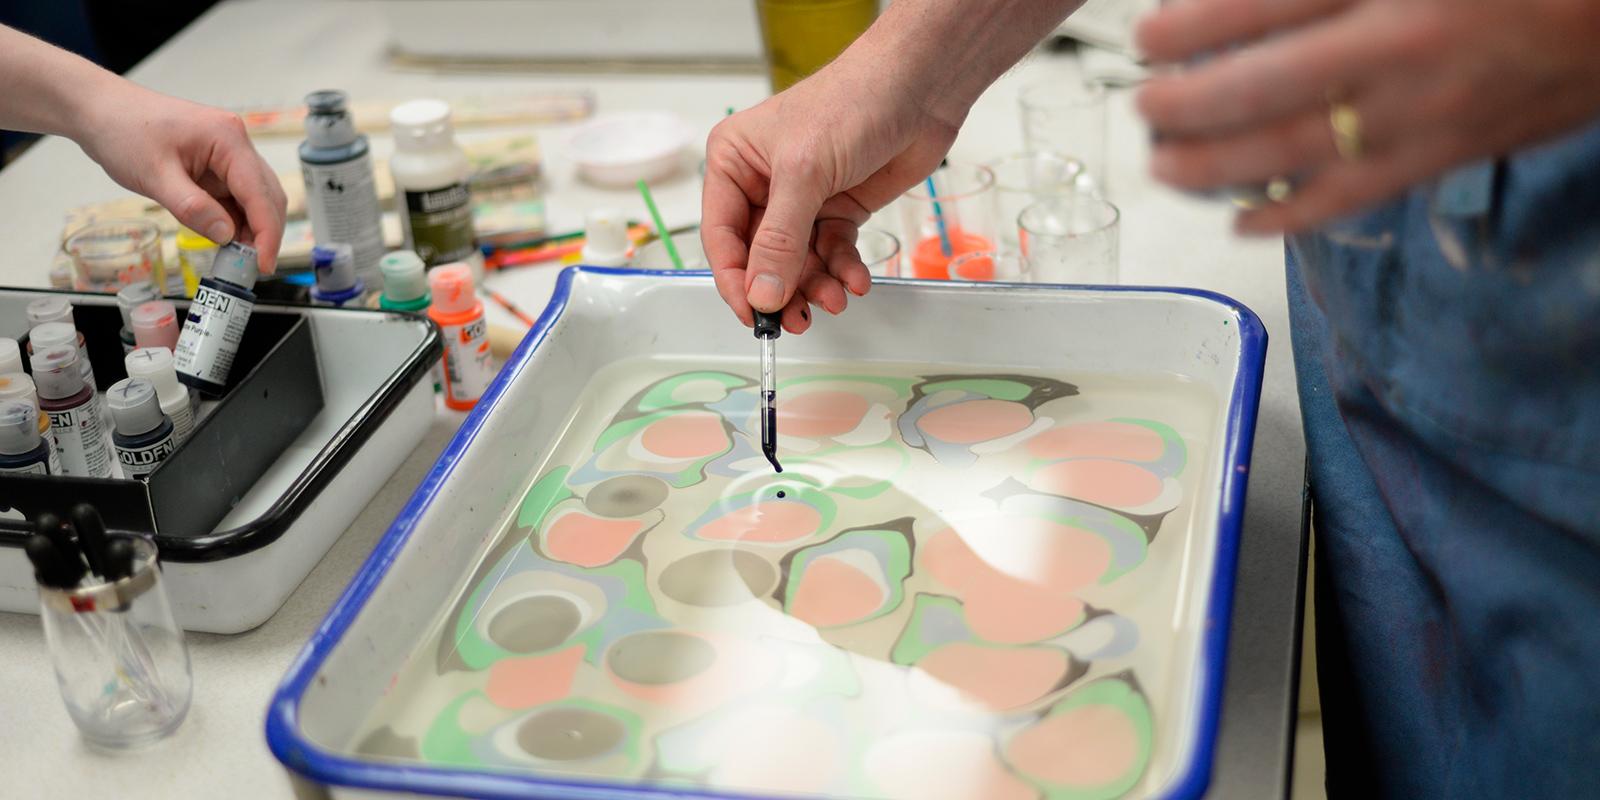 Students work with paints in a shallow pan, creating patterns.